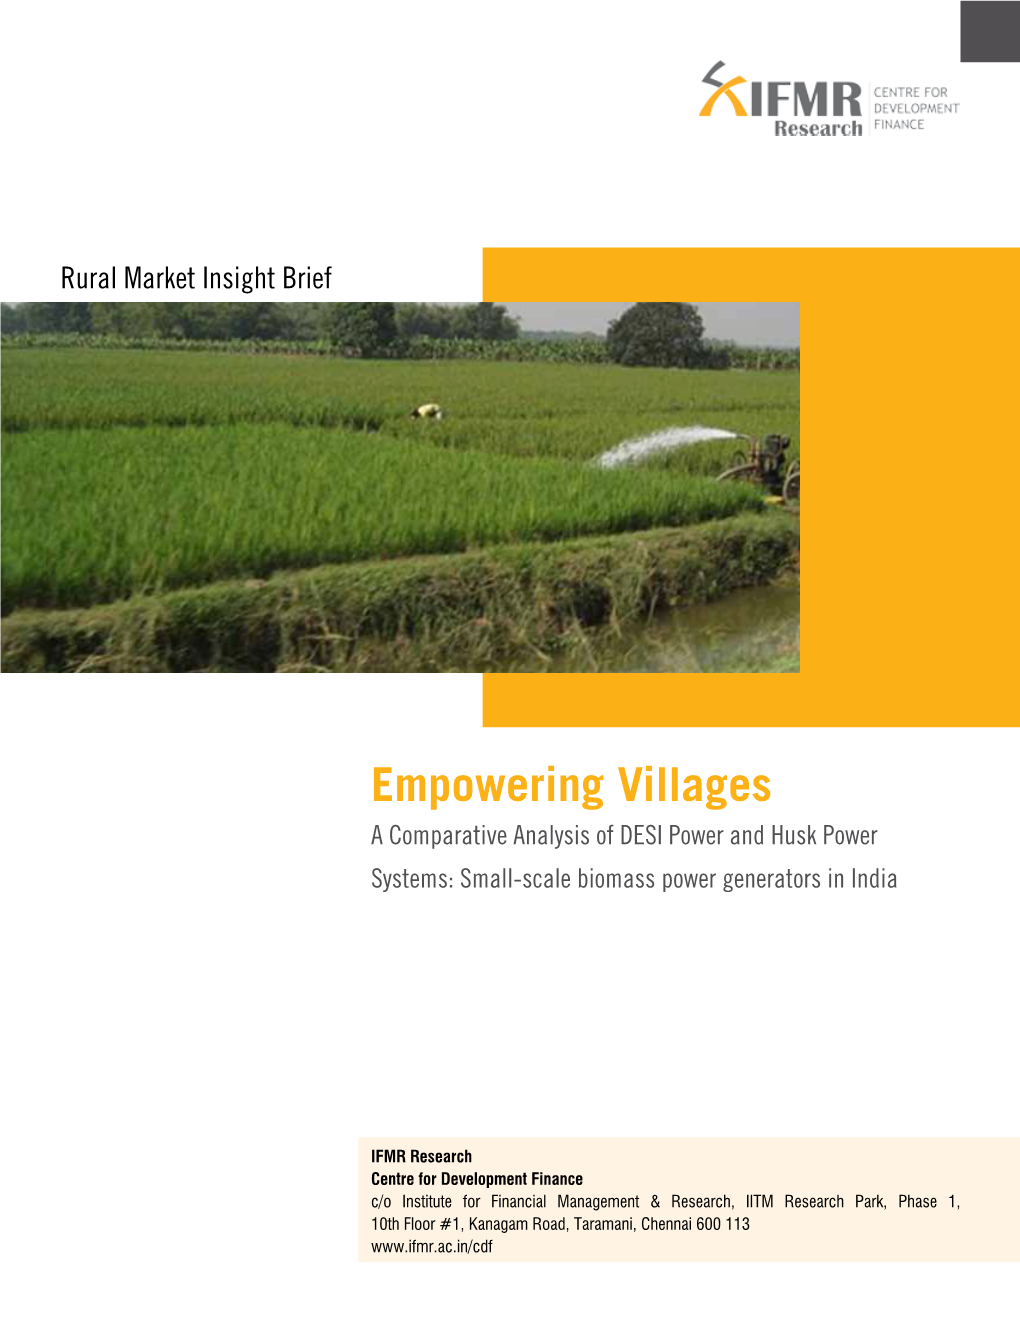 Empowering Villages a Comparative Analysis of DESI Power and Husk Power Systems: Small-Scale Biomass Power Generators in India